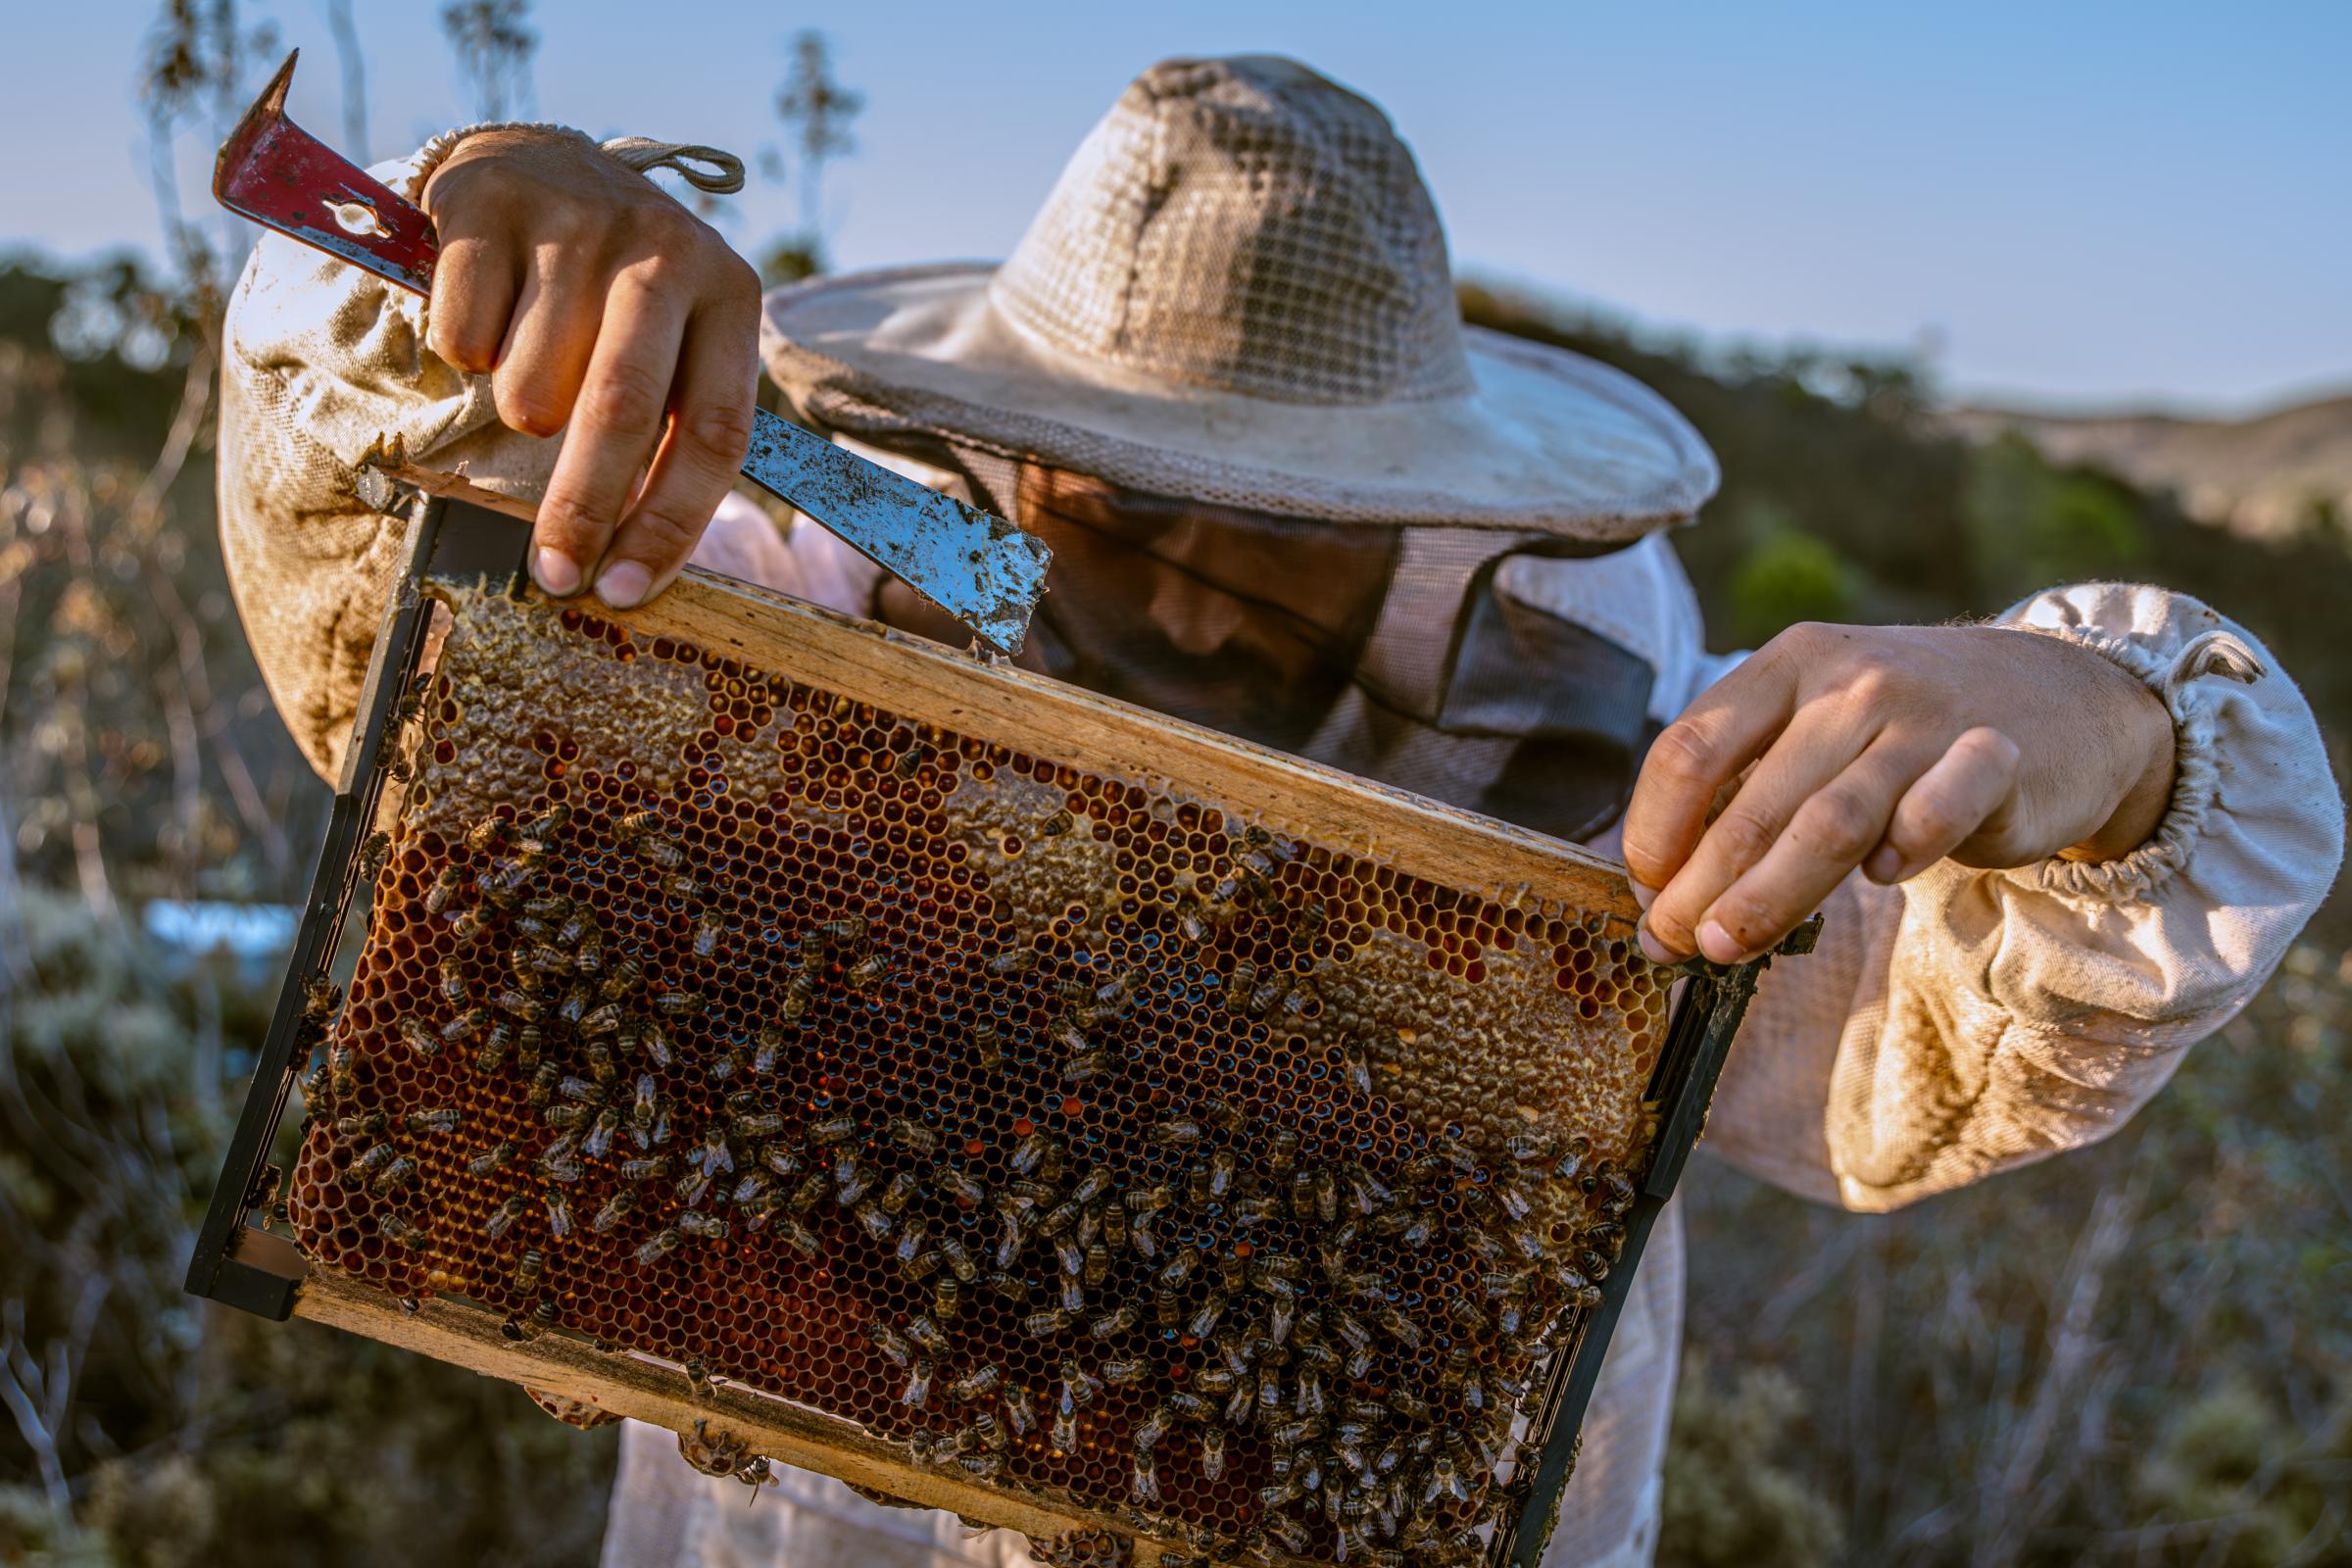 Silent Buzz: Ecosystems in Crisis - Due to the constant threats, visits to the apiaries must...